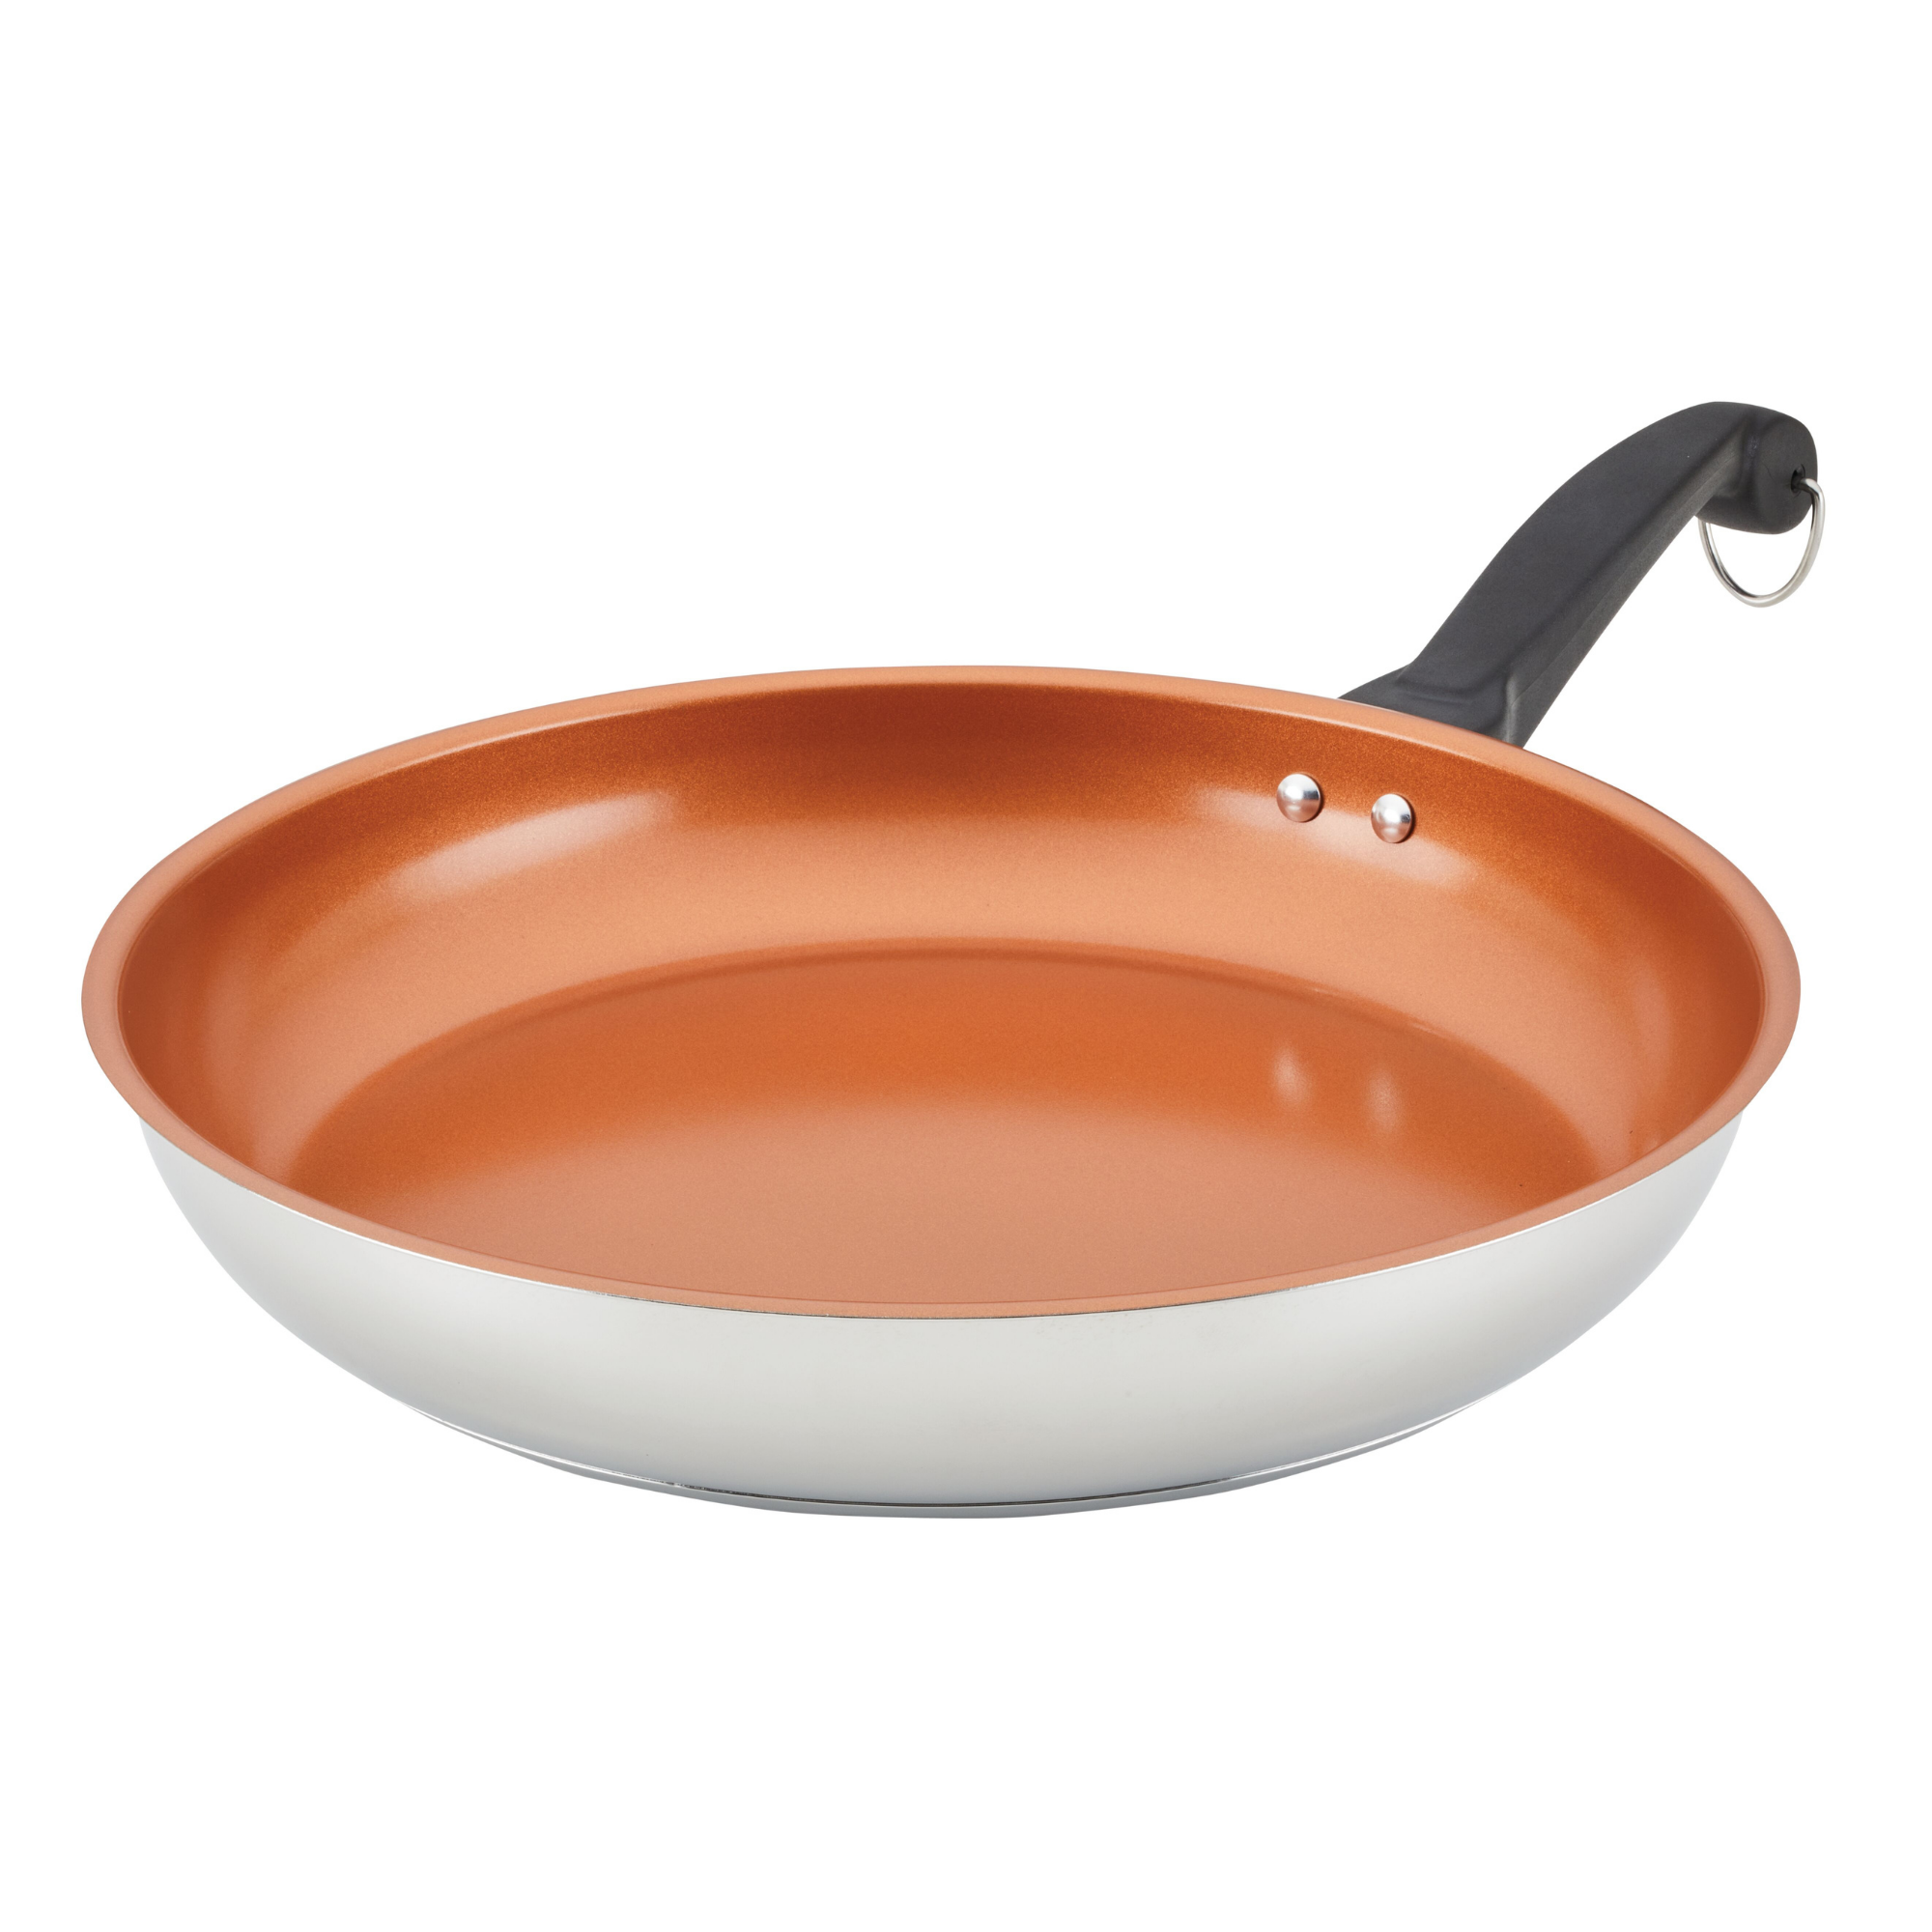 12.5-Inch Stainless Steel Ceramic Frying Pan